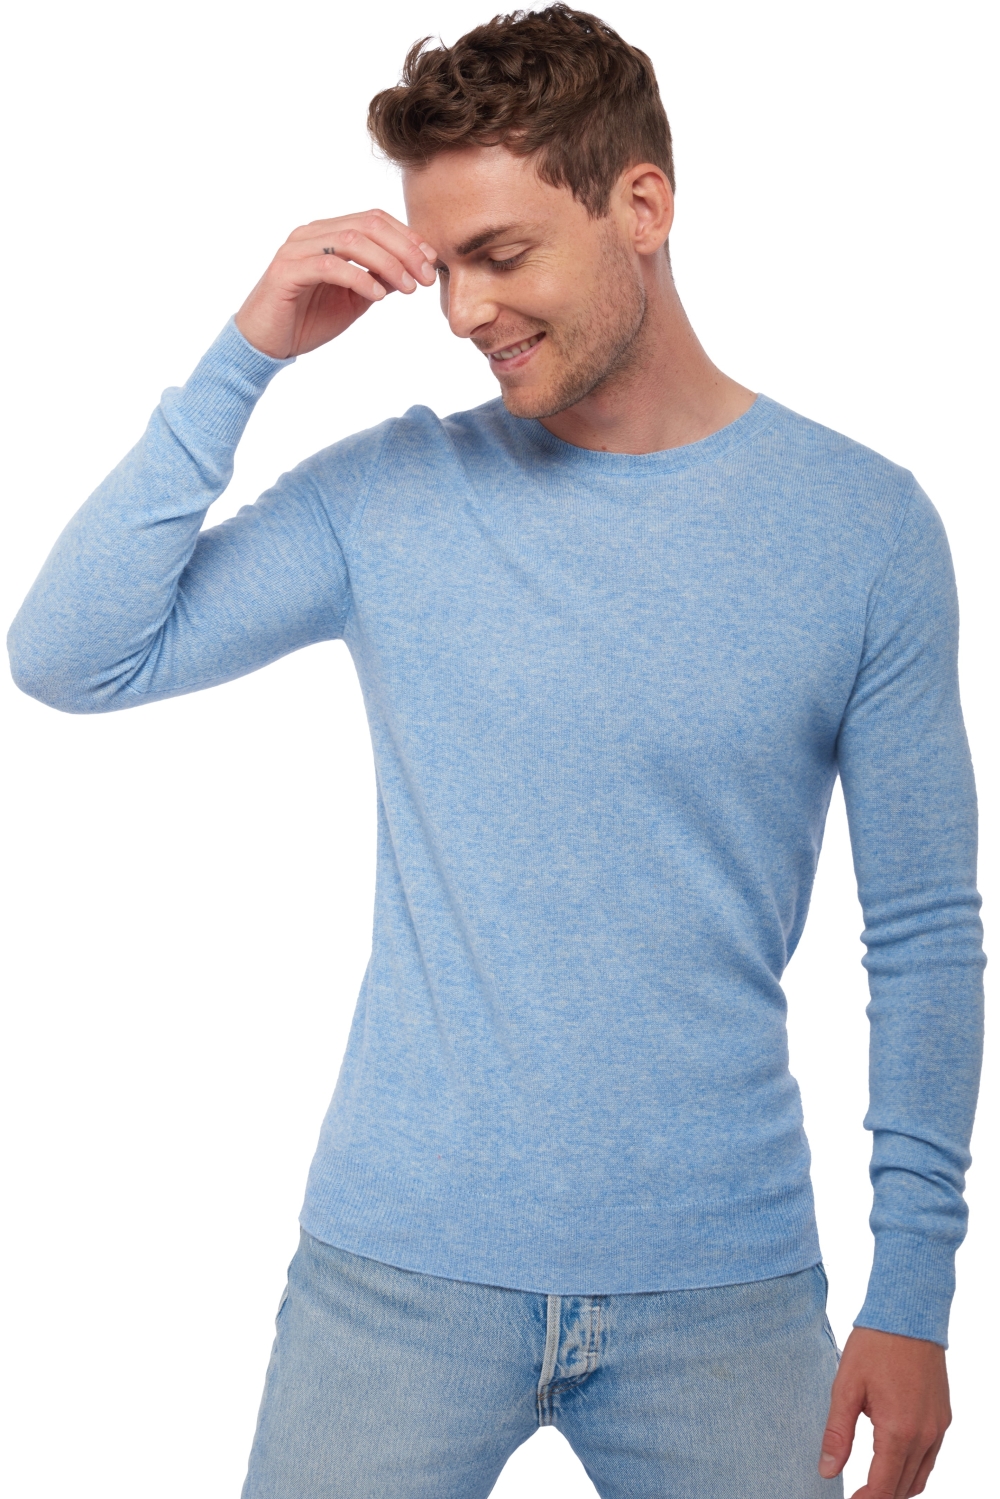 Cachemire pull homme col rond tao powder blue m